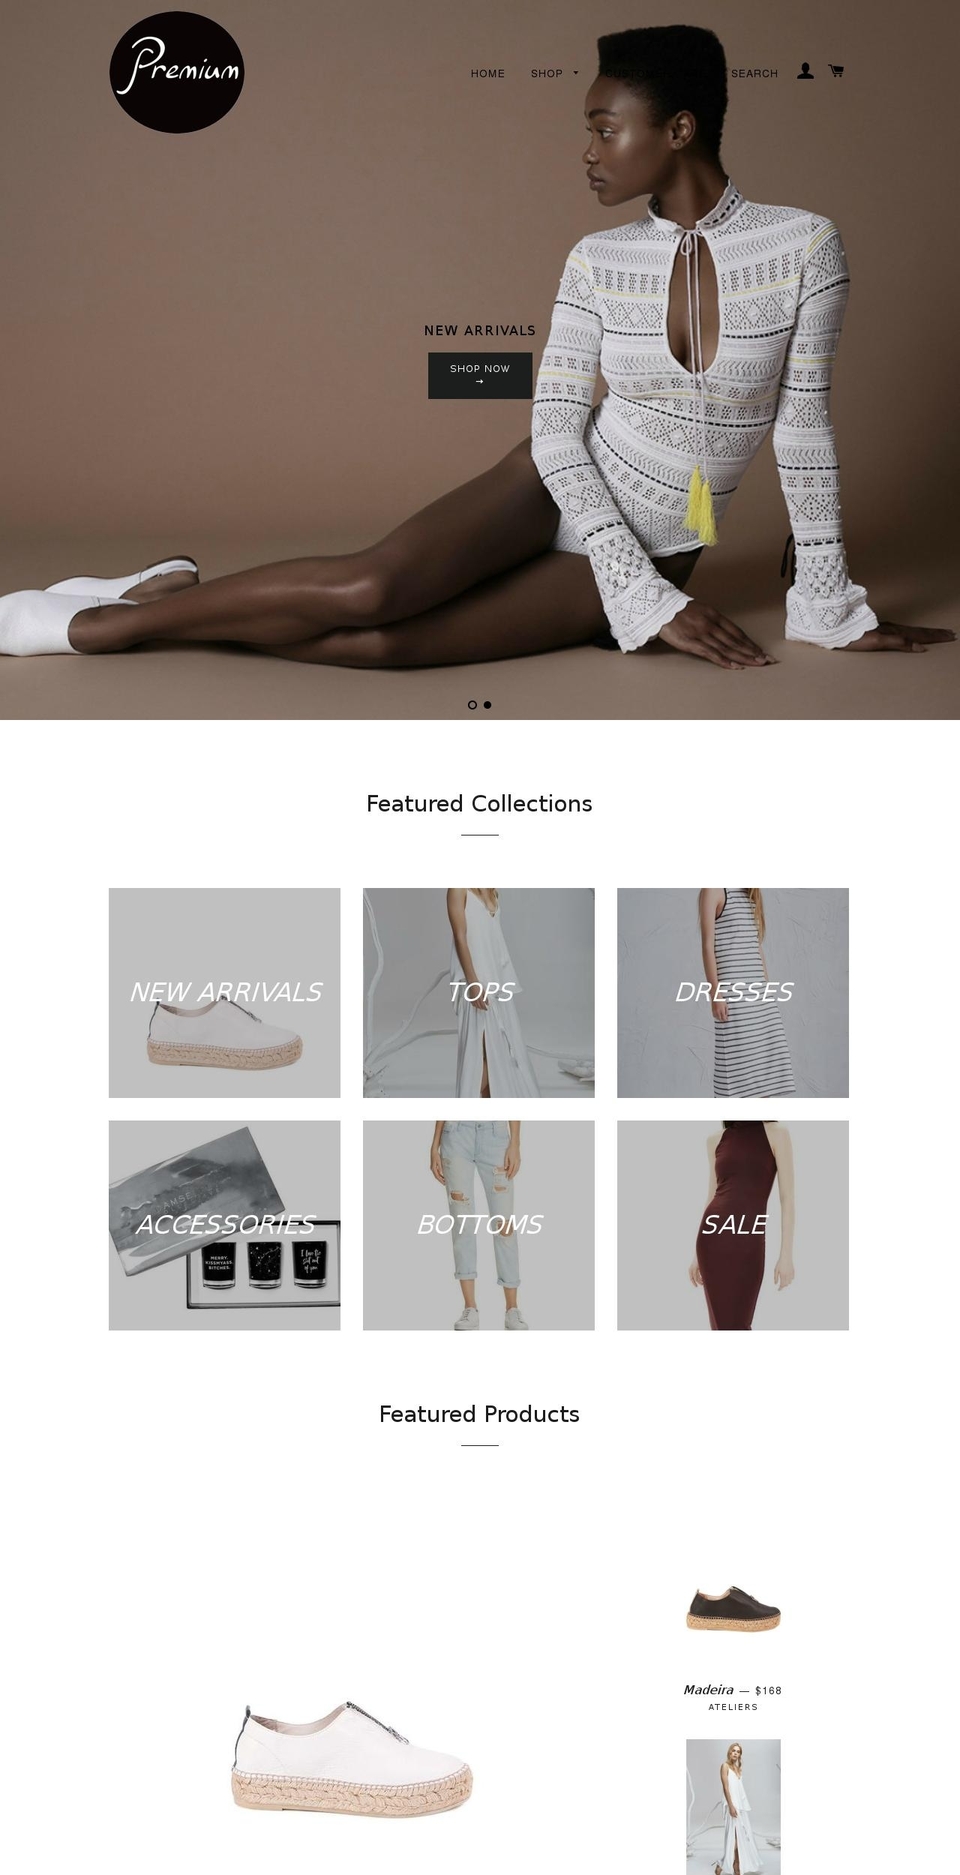 Chord Shopify theme site example premiumboutique.com